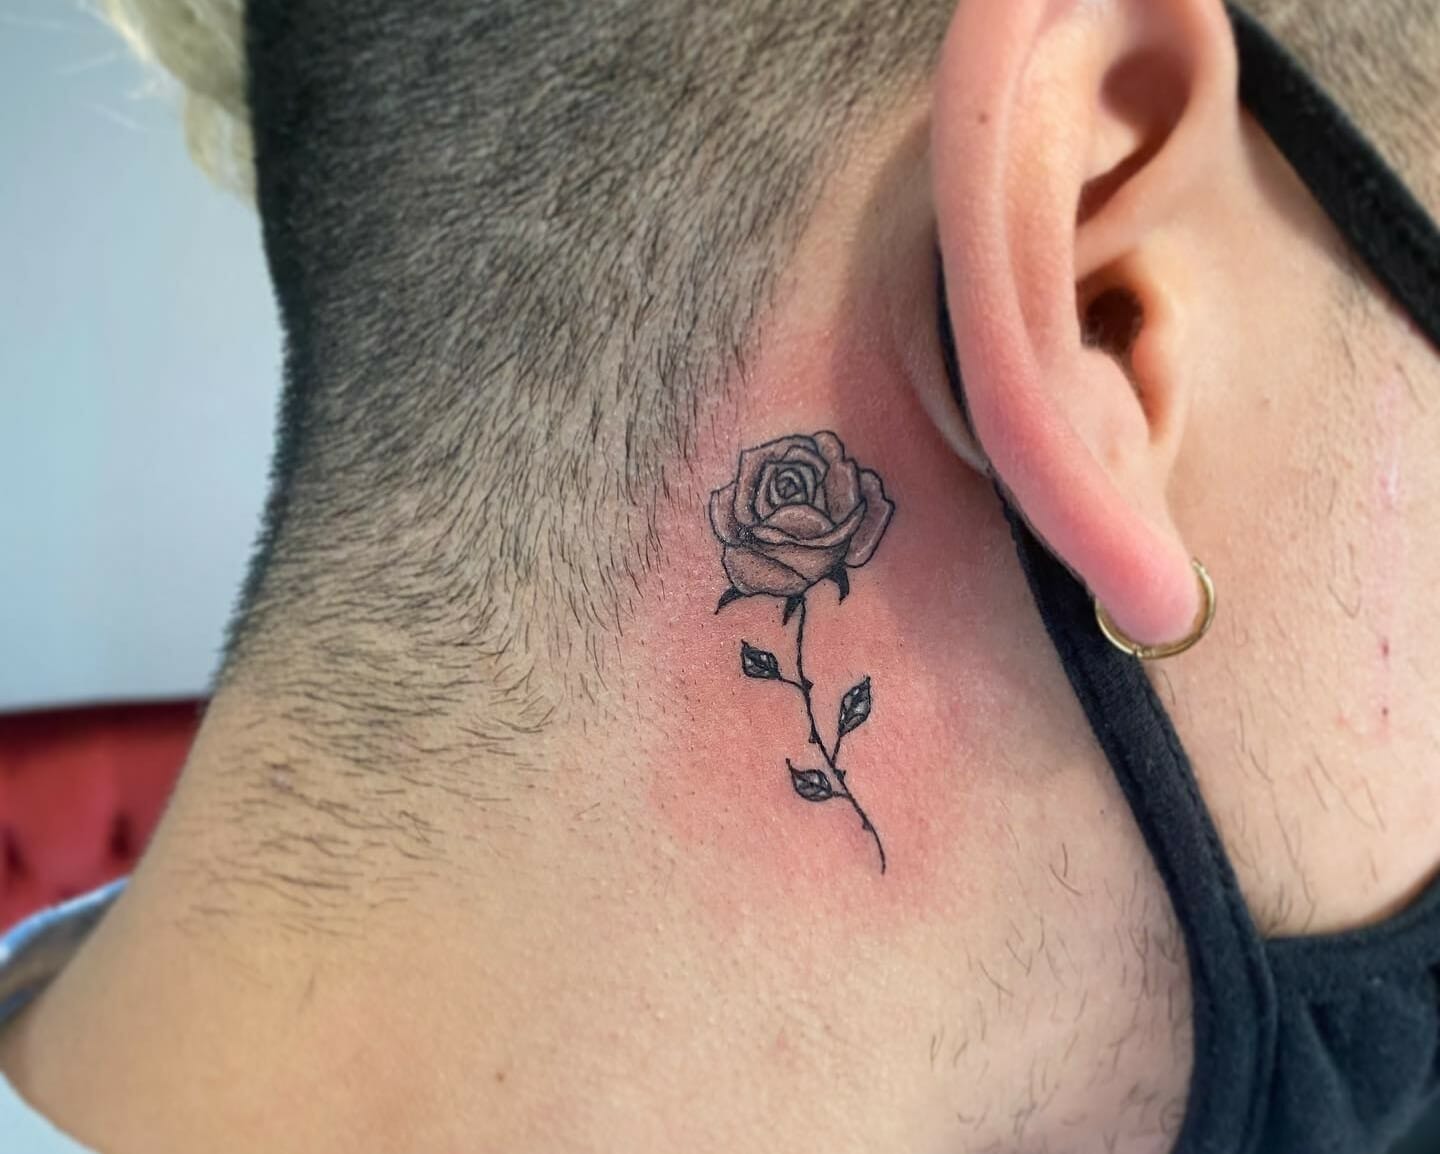 15 Behind the Ear Tattoo Ideas  Small Rose  Idea Wallpapers  iPhone  WallpapersColor Schemes